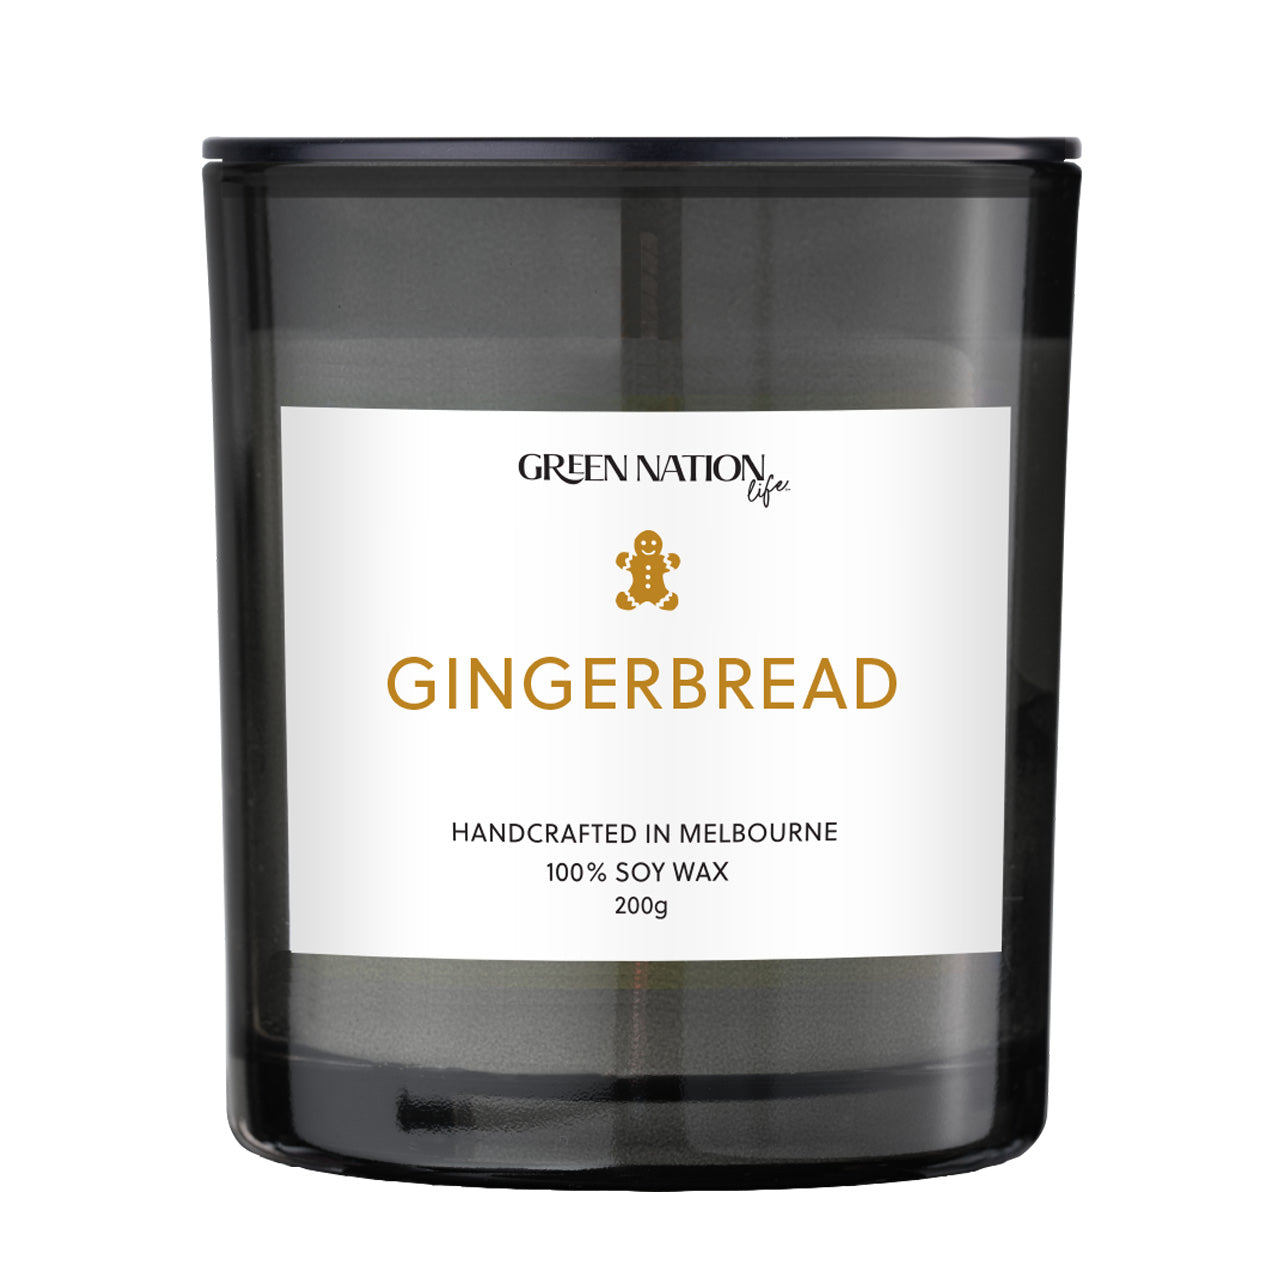 Soy Wax Candle 200g - Gingerbread